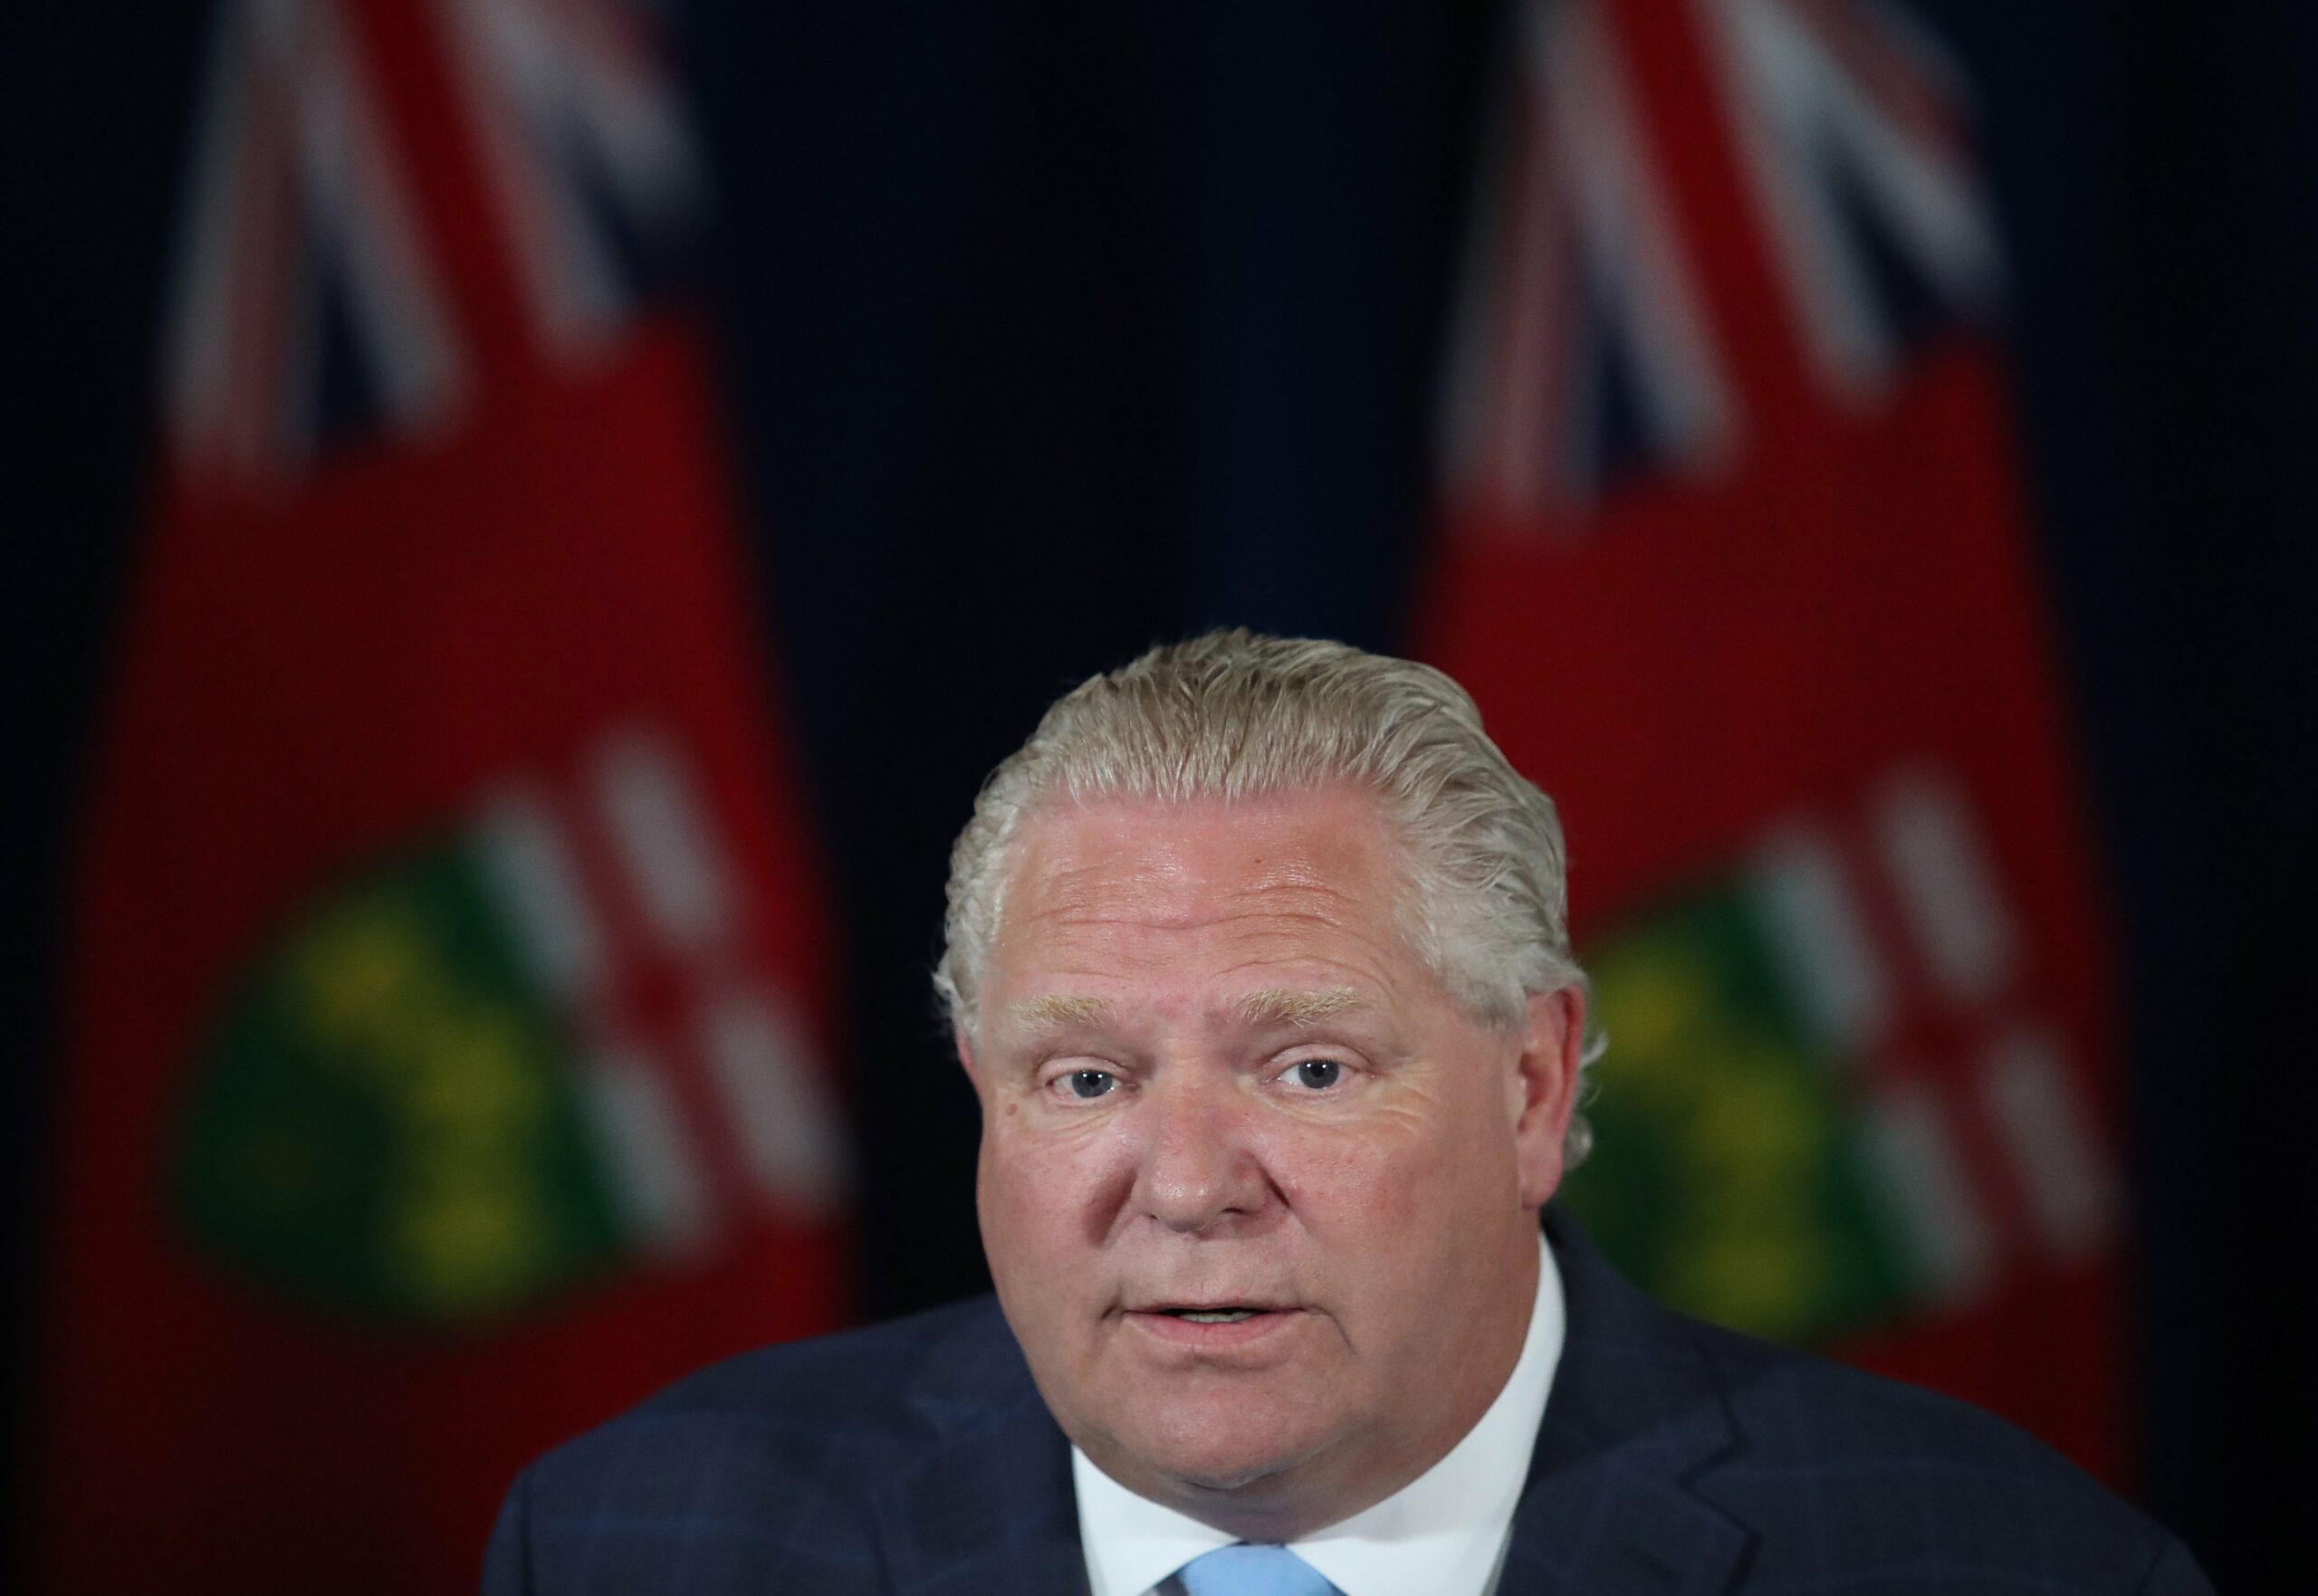 Premier holds three big-money political fundraisers in one week as Ontario is mired in health system crisis